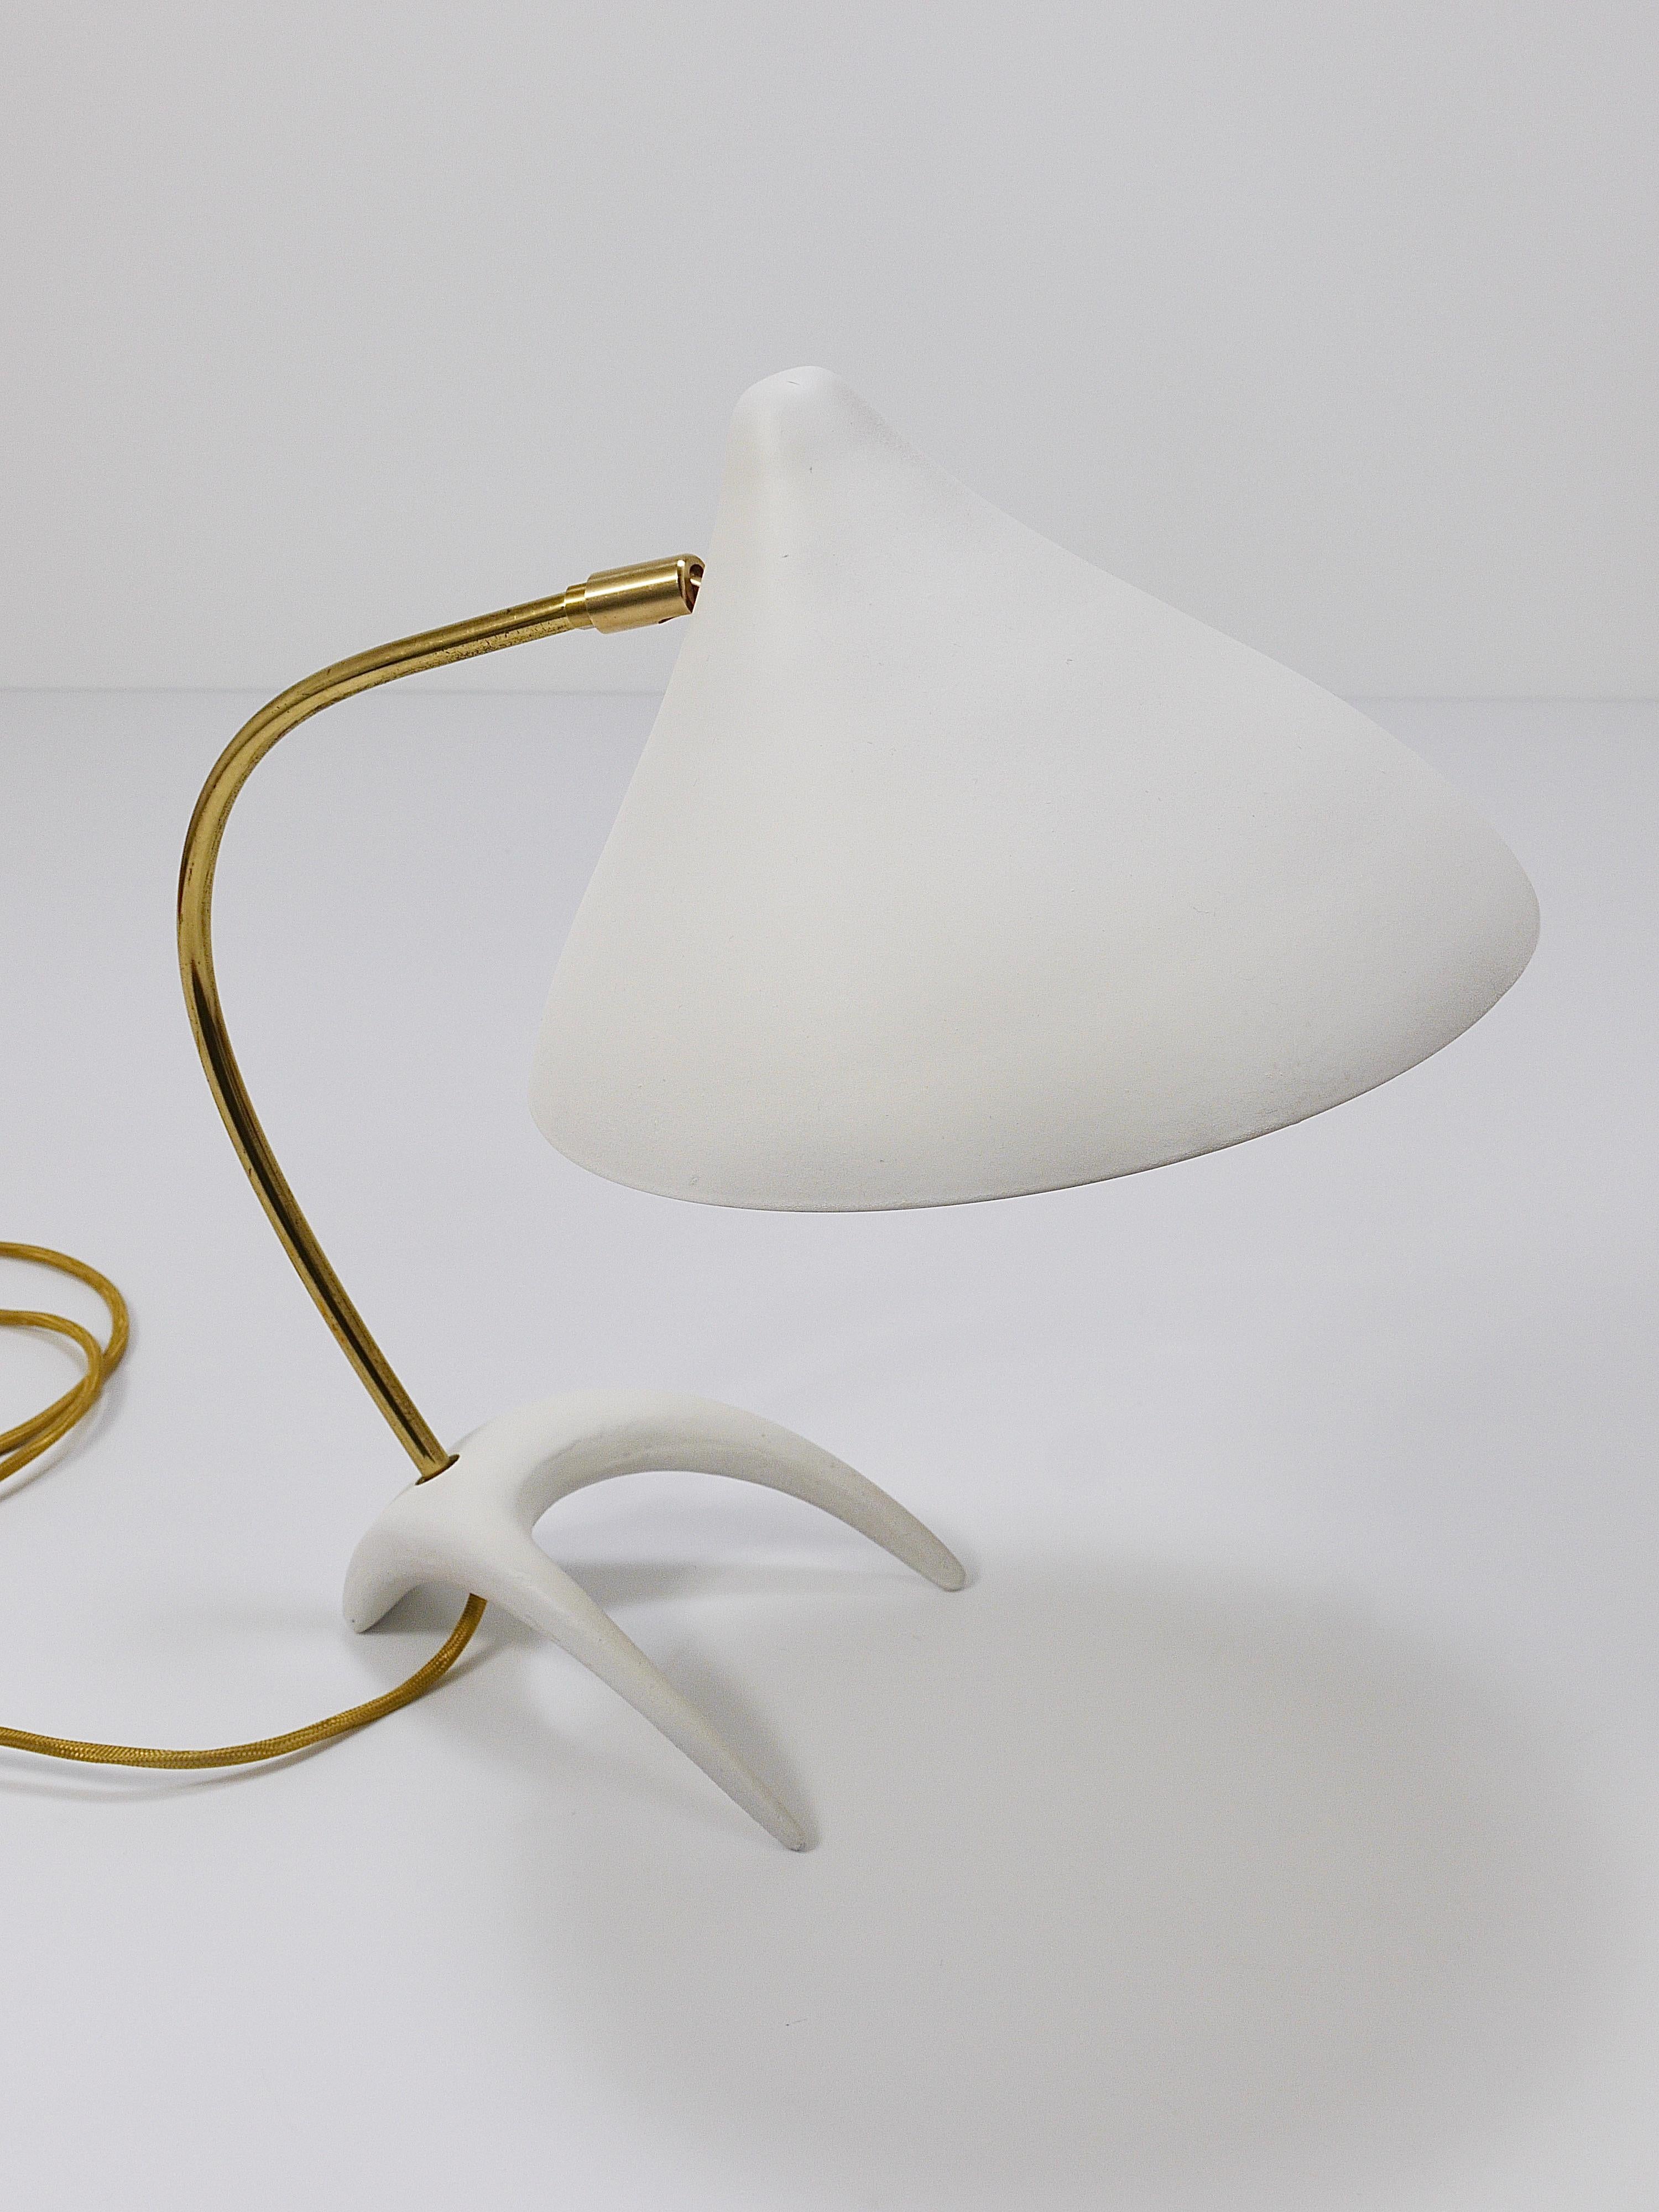 1950s Louis Kalff Style White Mid-Century Brass Desk or Table Lamp For Sale 7